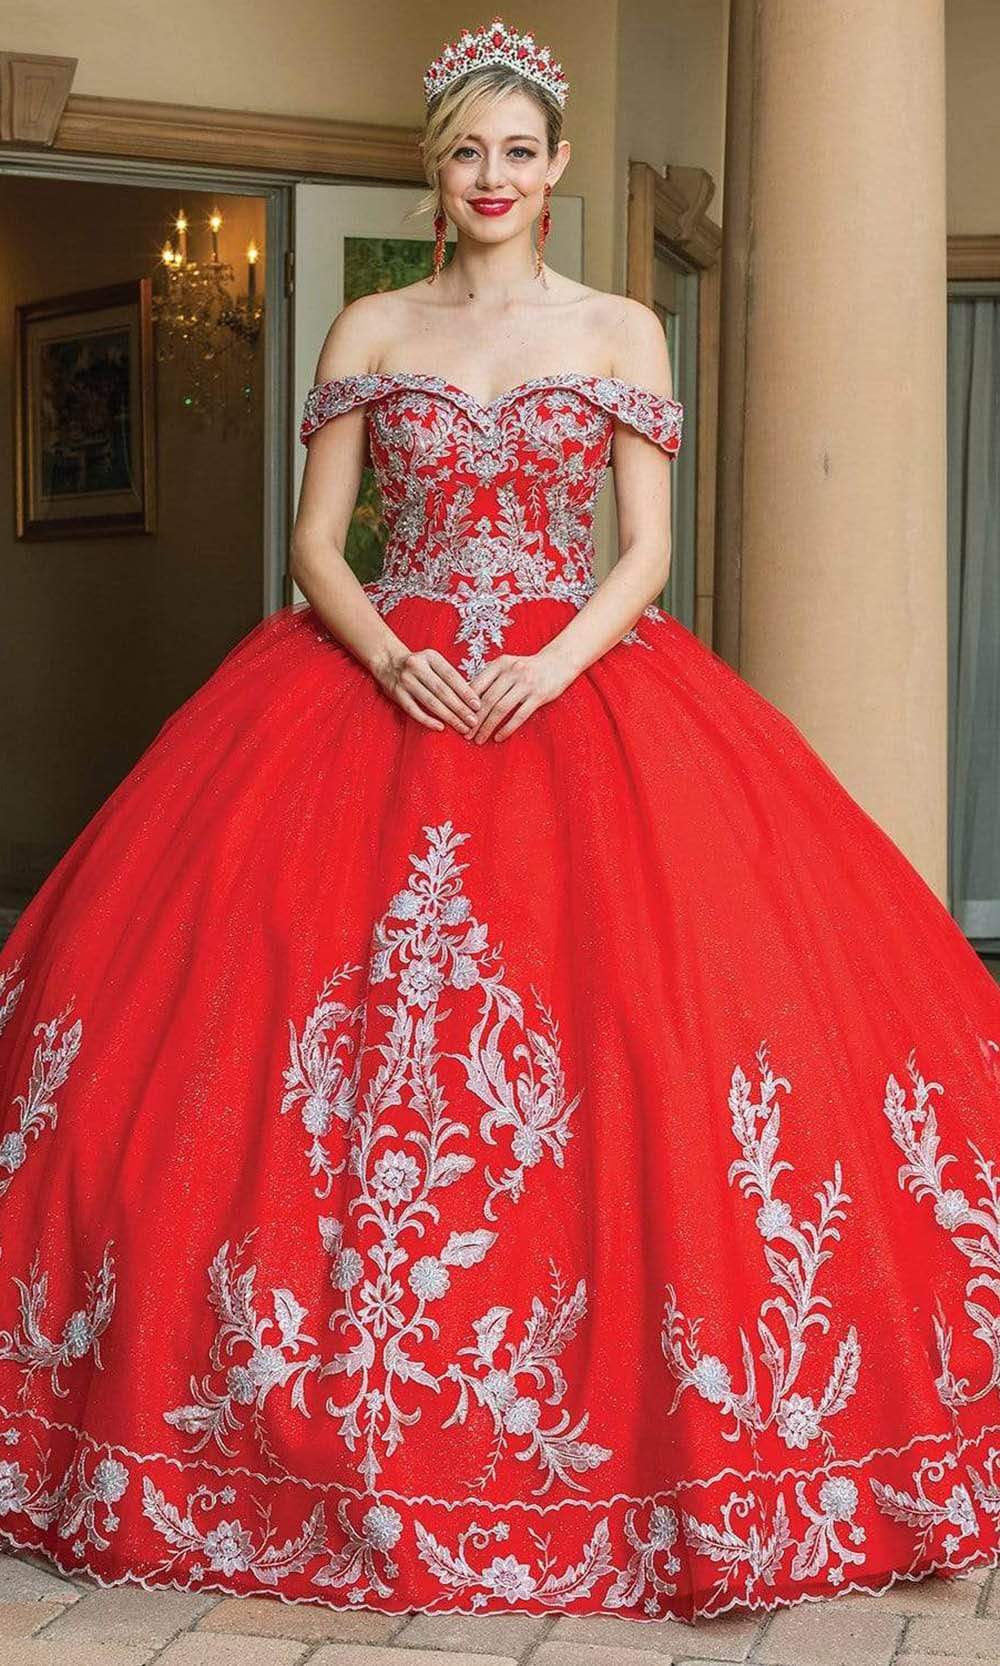 Dancing Queen - 1596 Embroidered Off Shoulder Ballgown
